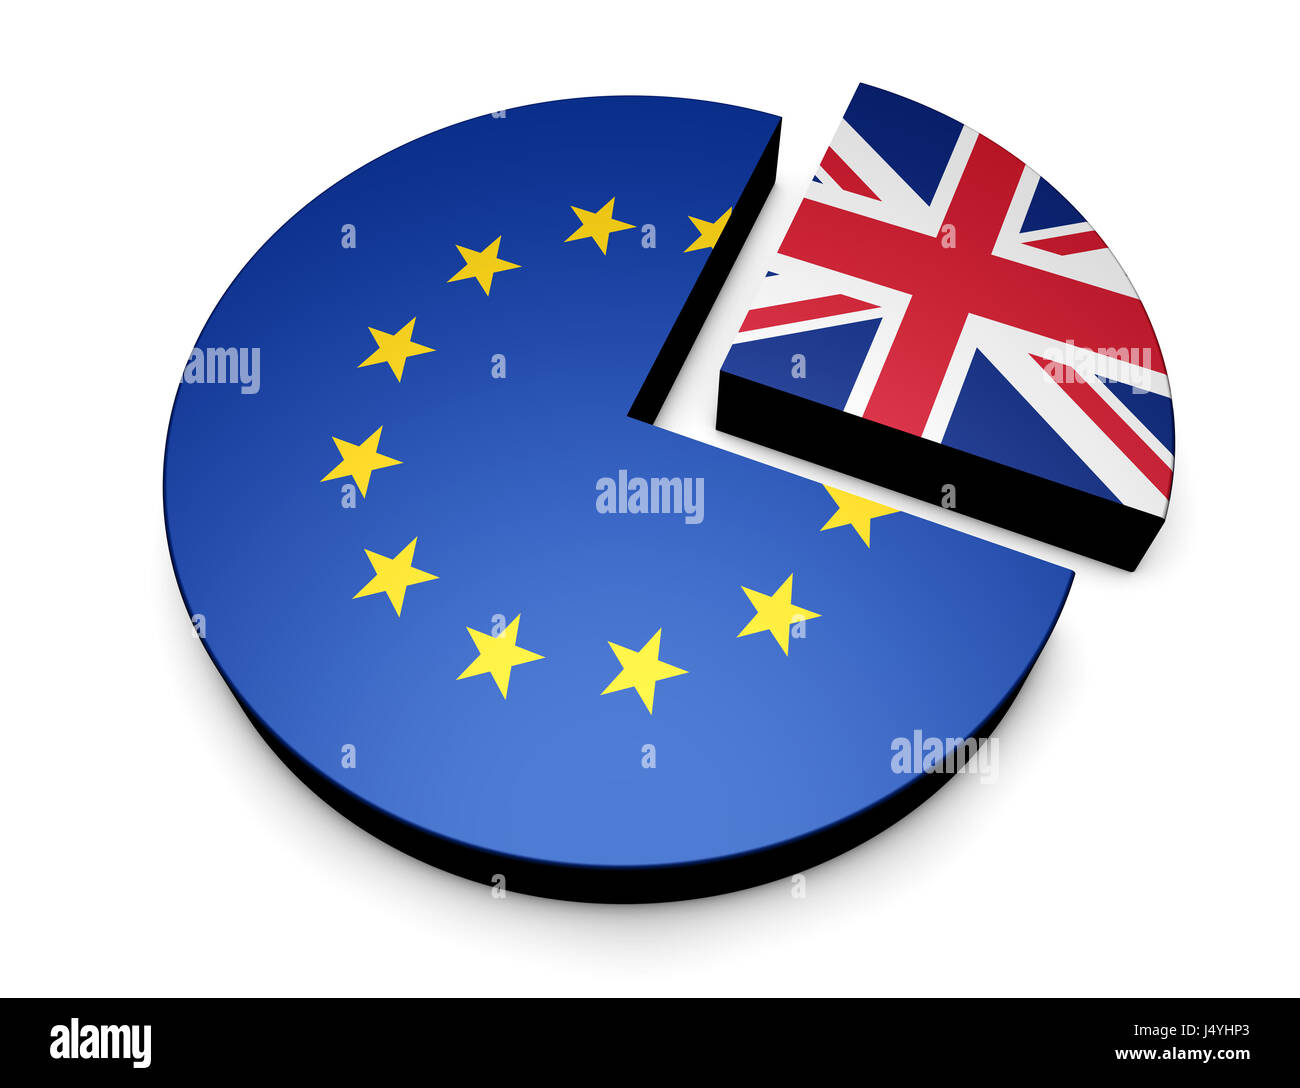 Brexit Britain separation from European Union concept with UK and EU flags on a pie chart 3d illustration. Stock Photo